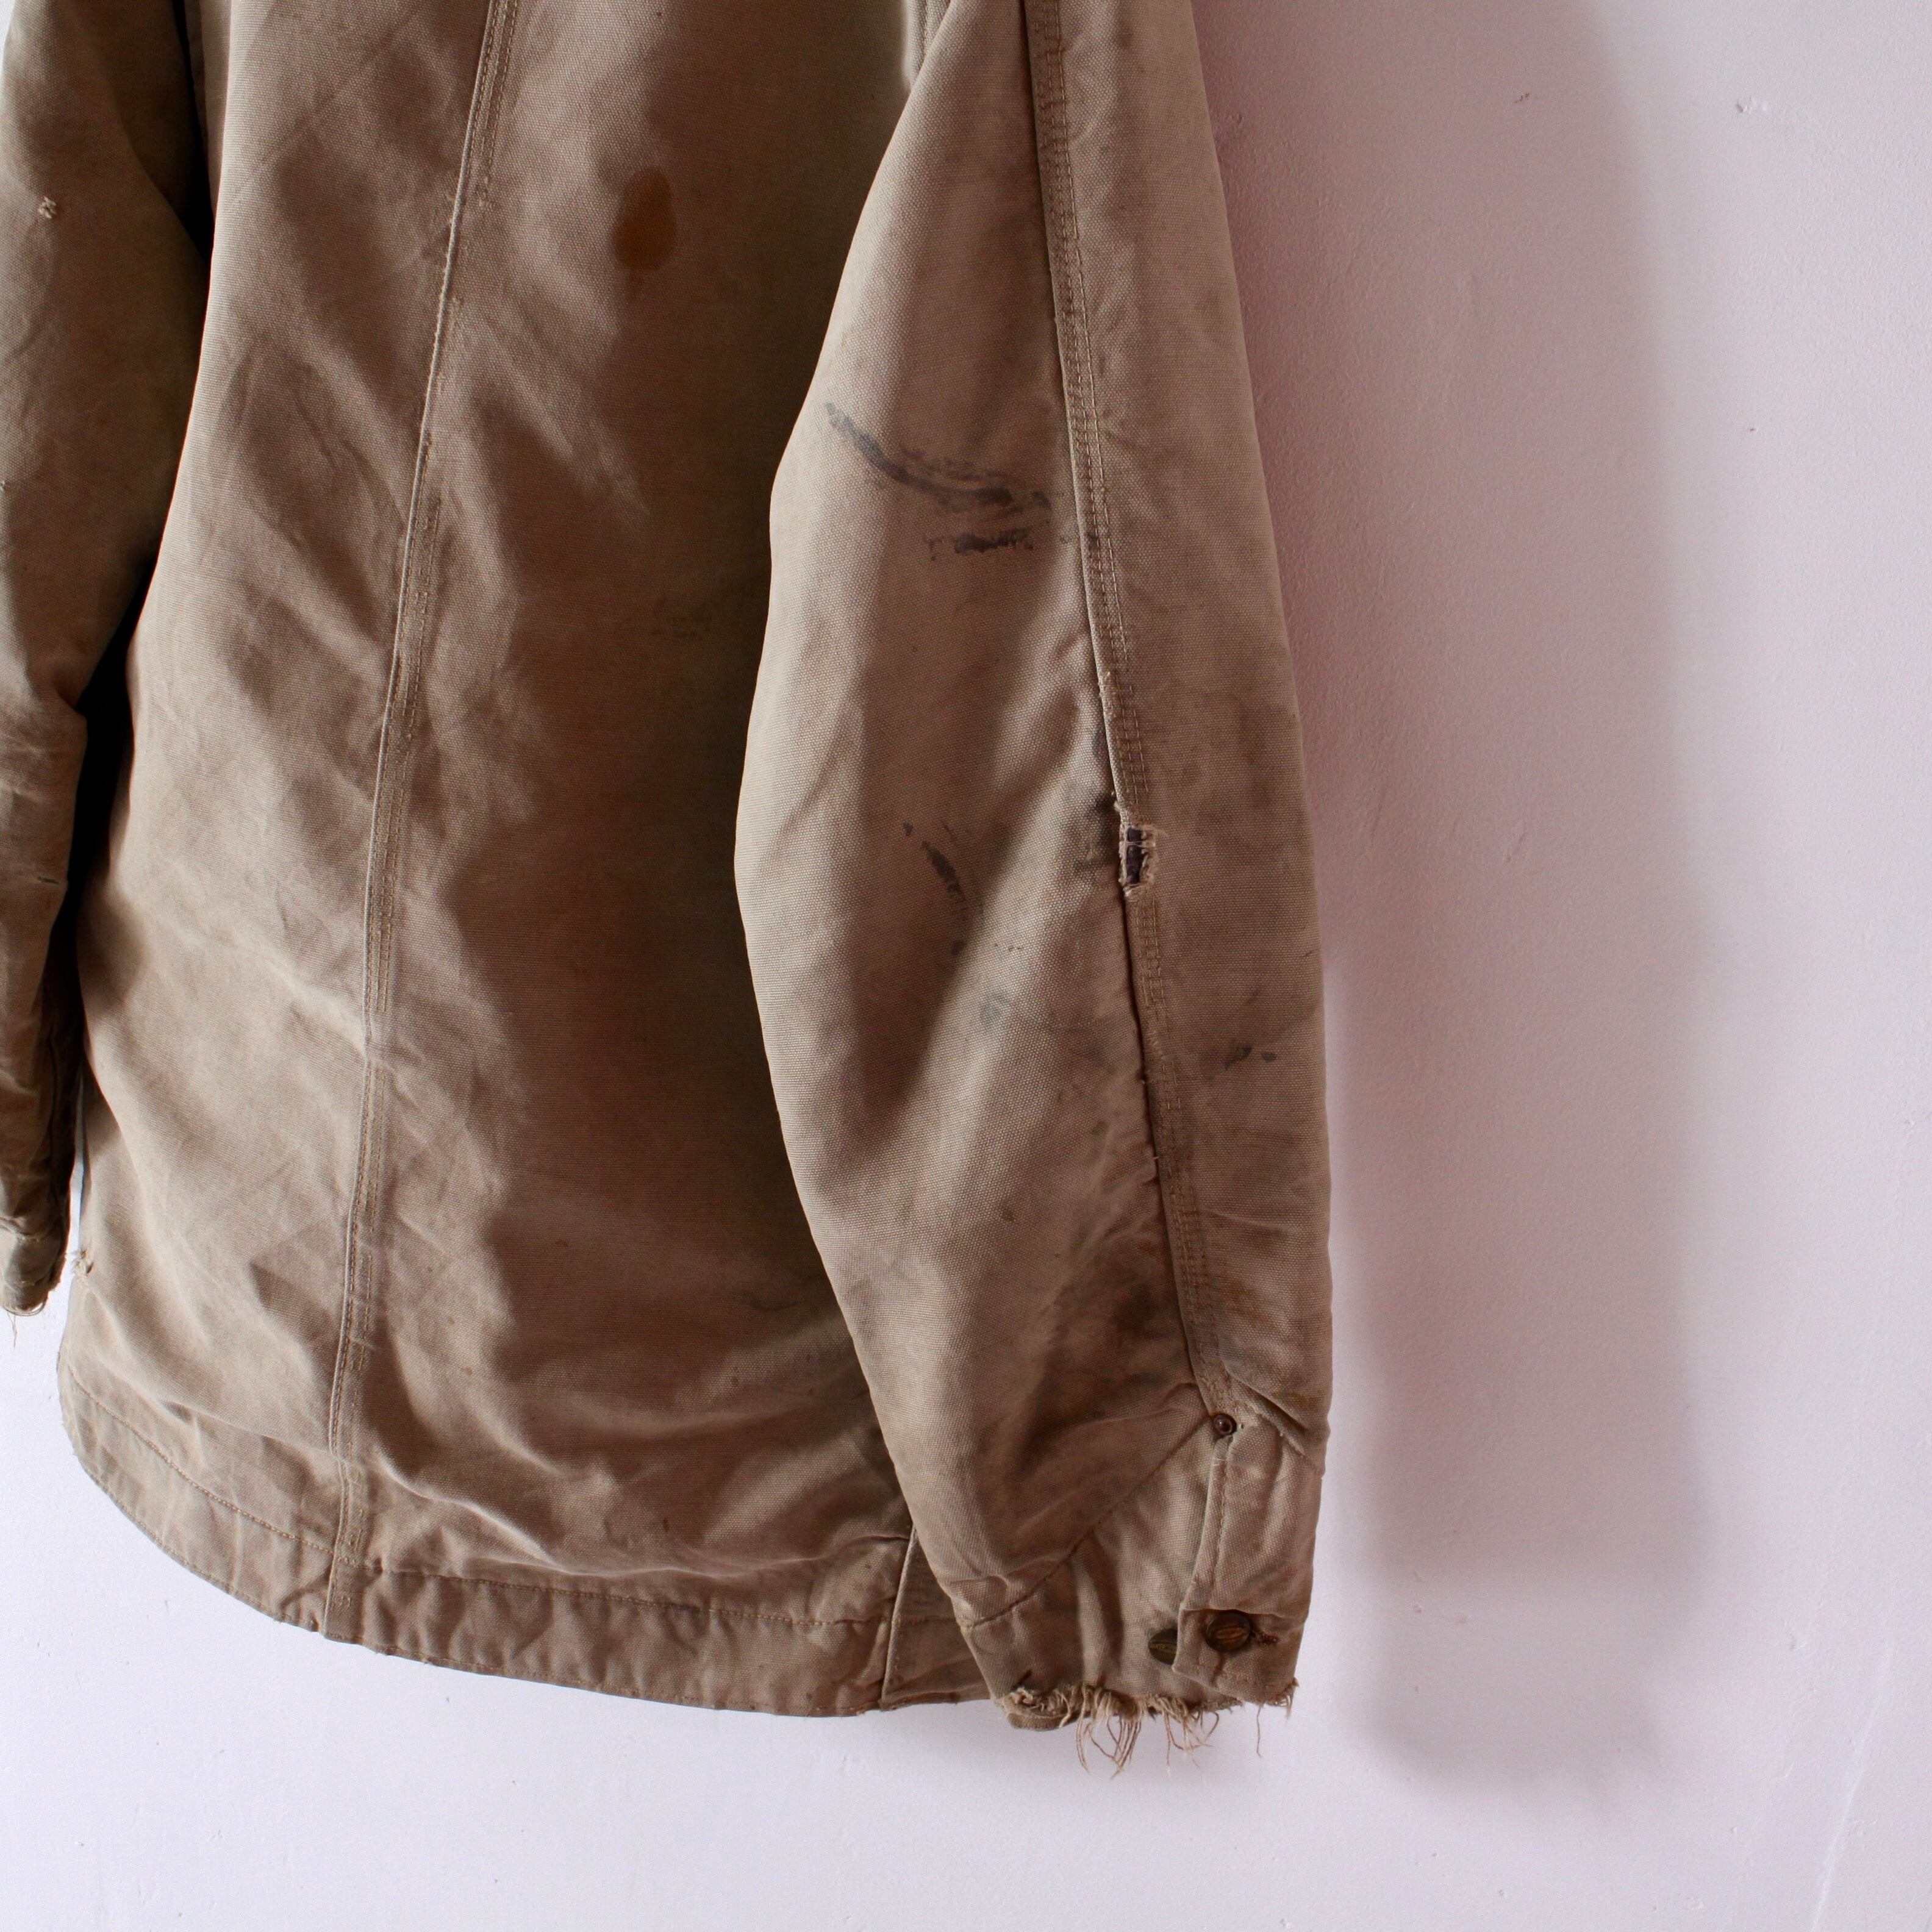 0795. 1970's Carhartt faded and stains duck chore coat 70s 70年代 カーハート  チョアコート カバーオール ブラウンダック vintage ヴィンテージ us古着 古着